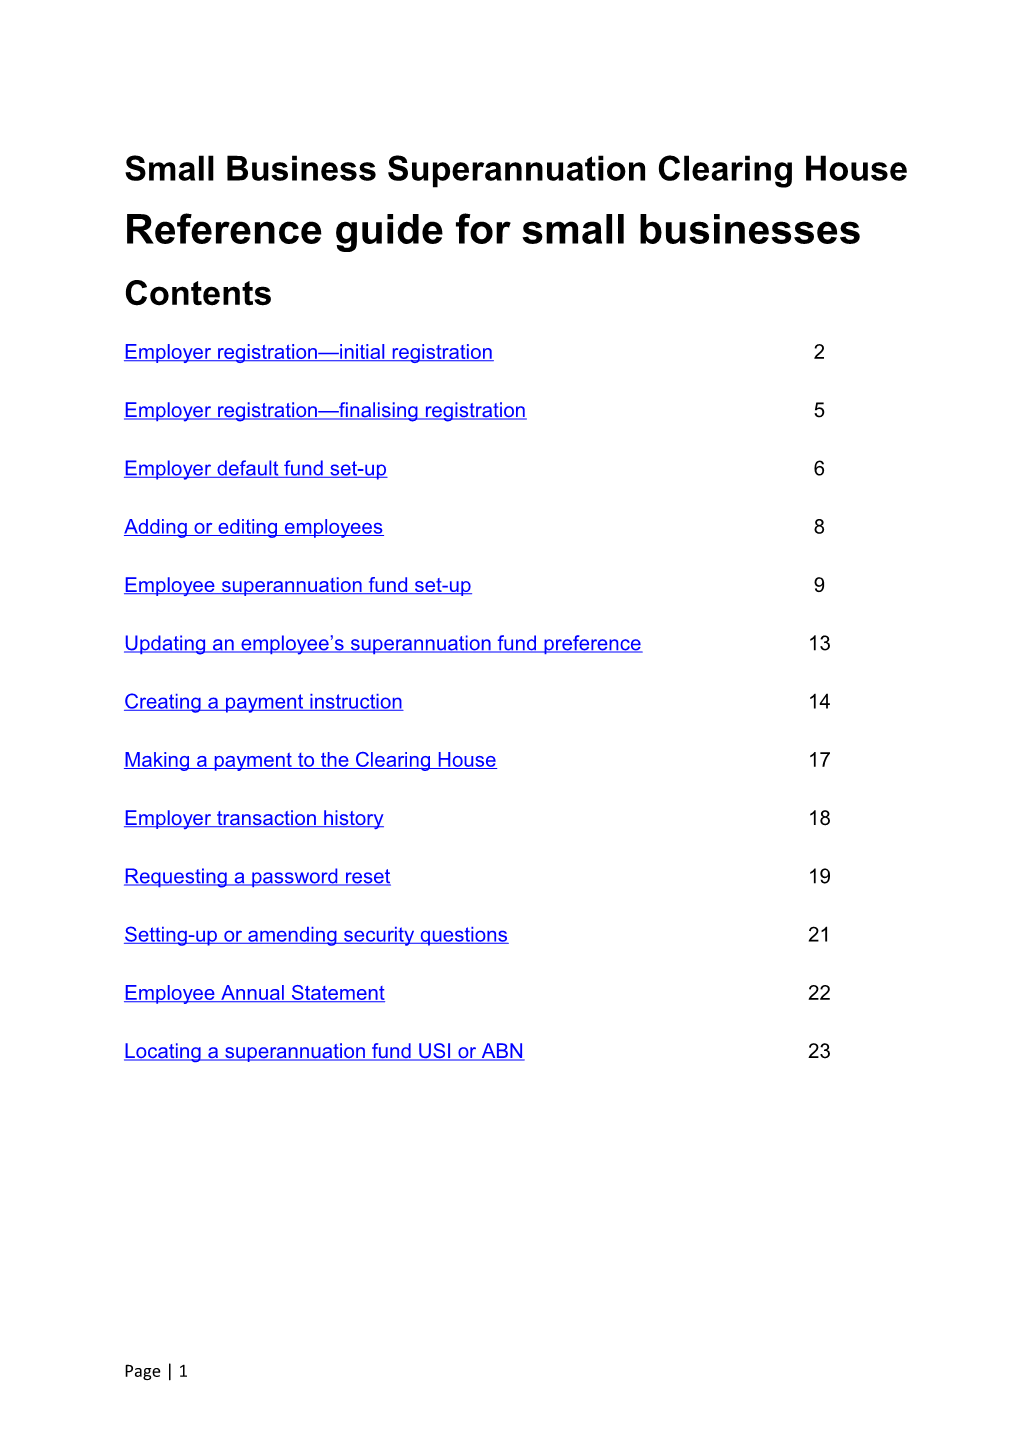 Reference Guide for Small Businesses - Small Business Superannuation Clearing House